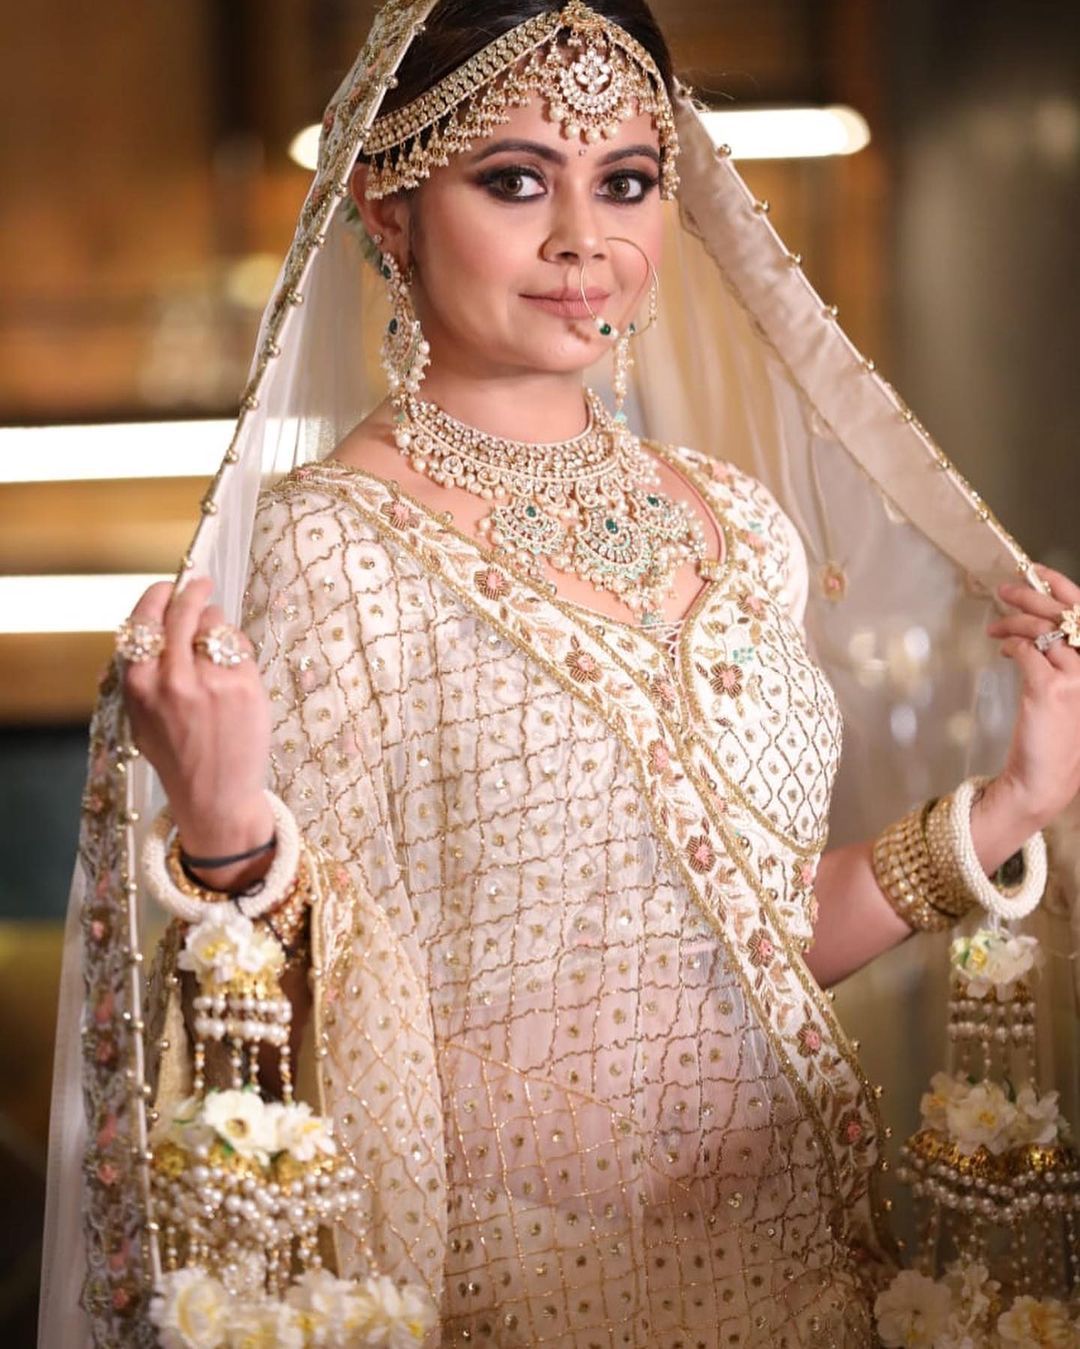 Devoleena Bhattacharjee's Wedding Plans Pushed Forward, Actress Opens Up About Why She Won't Share Her Partner's Identity